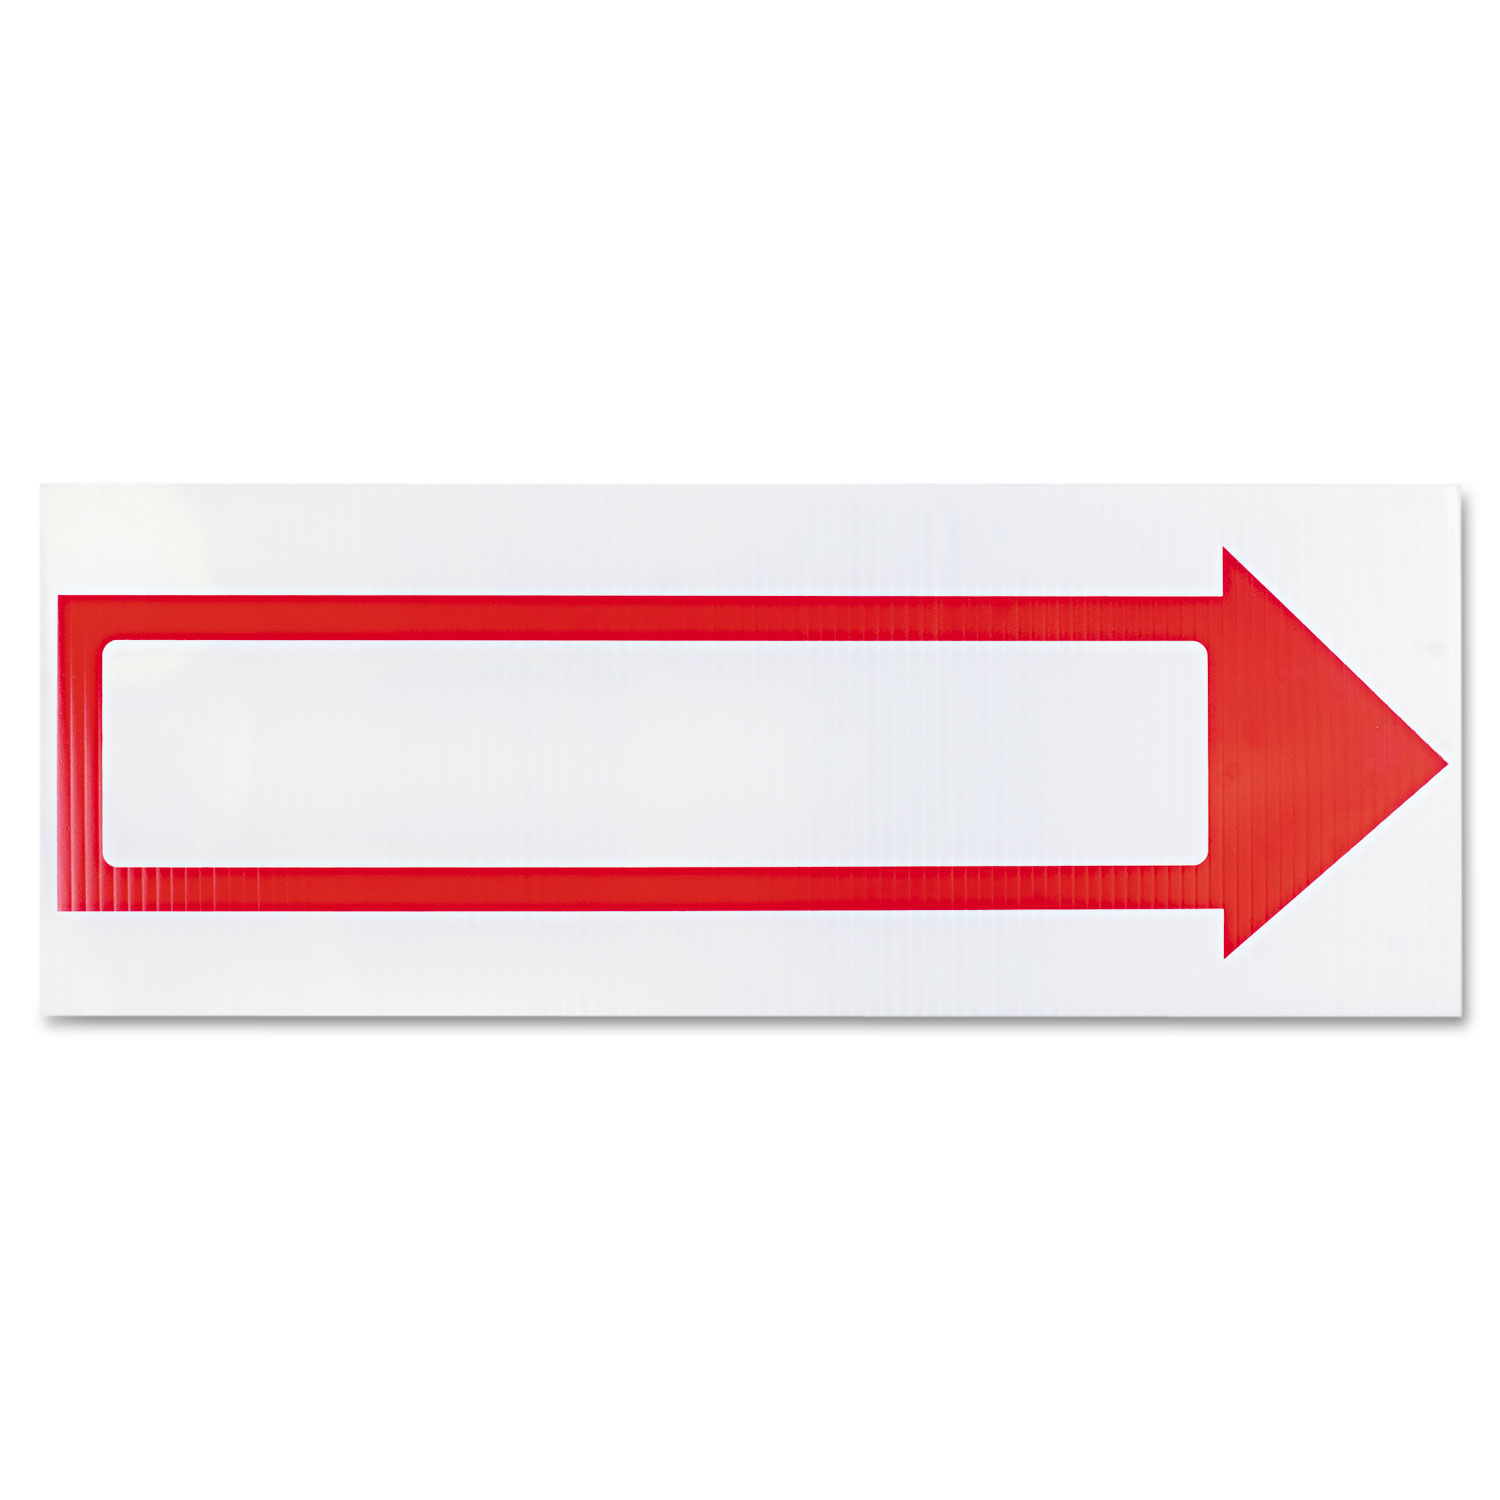 Stake Sign, 6 x 17, Blank White with Printed Red Arrow